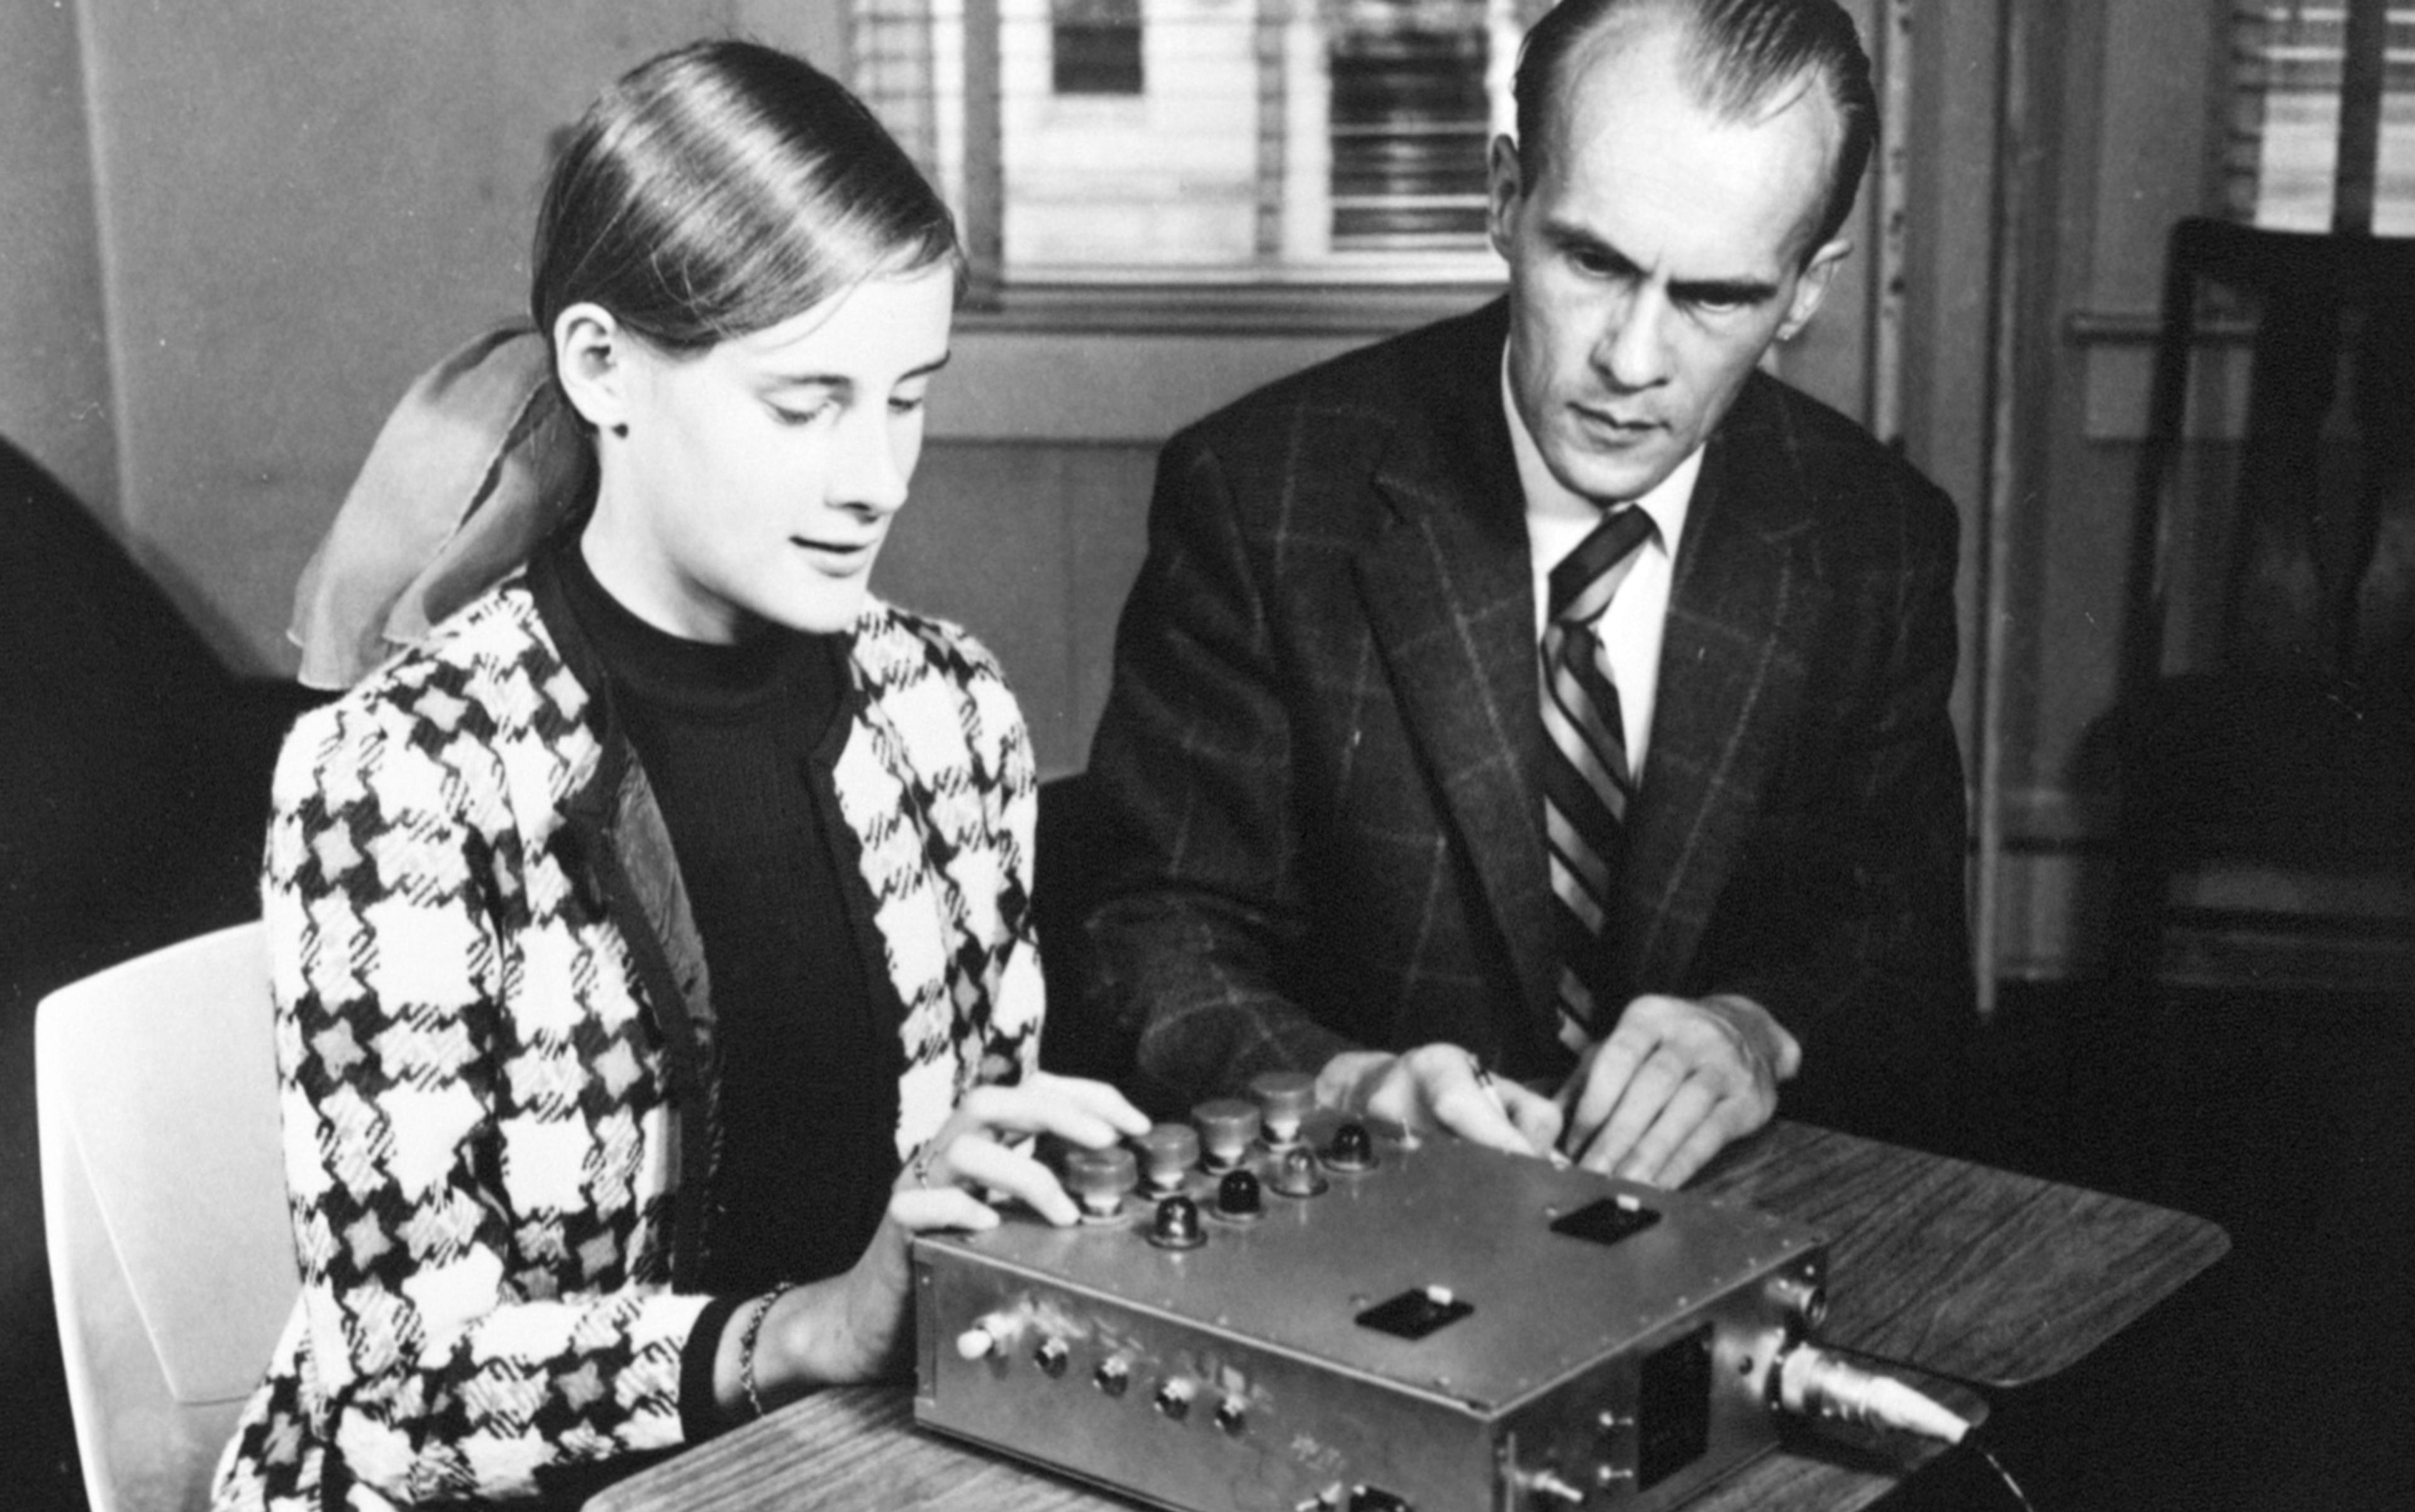 A young woman and a man, both dressed formally, sit at a table with an electronic device in front of them. The woman is engaging with the device, which has several buttons and dials, while the man observes attentively. The setting appears to be an office or classroom. The image is in black and white.